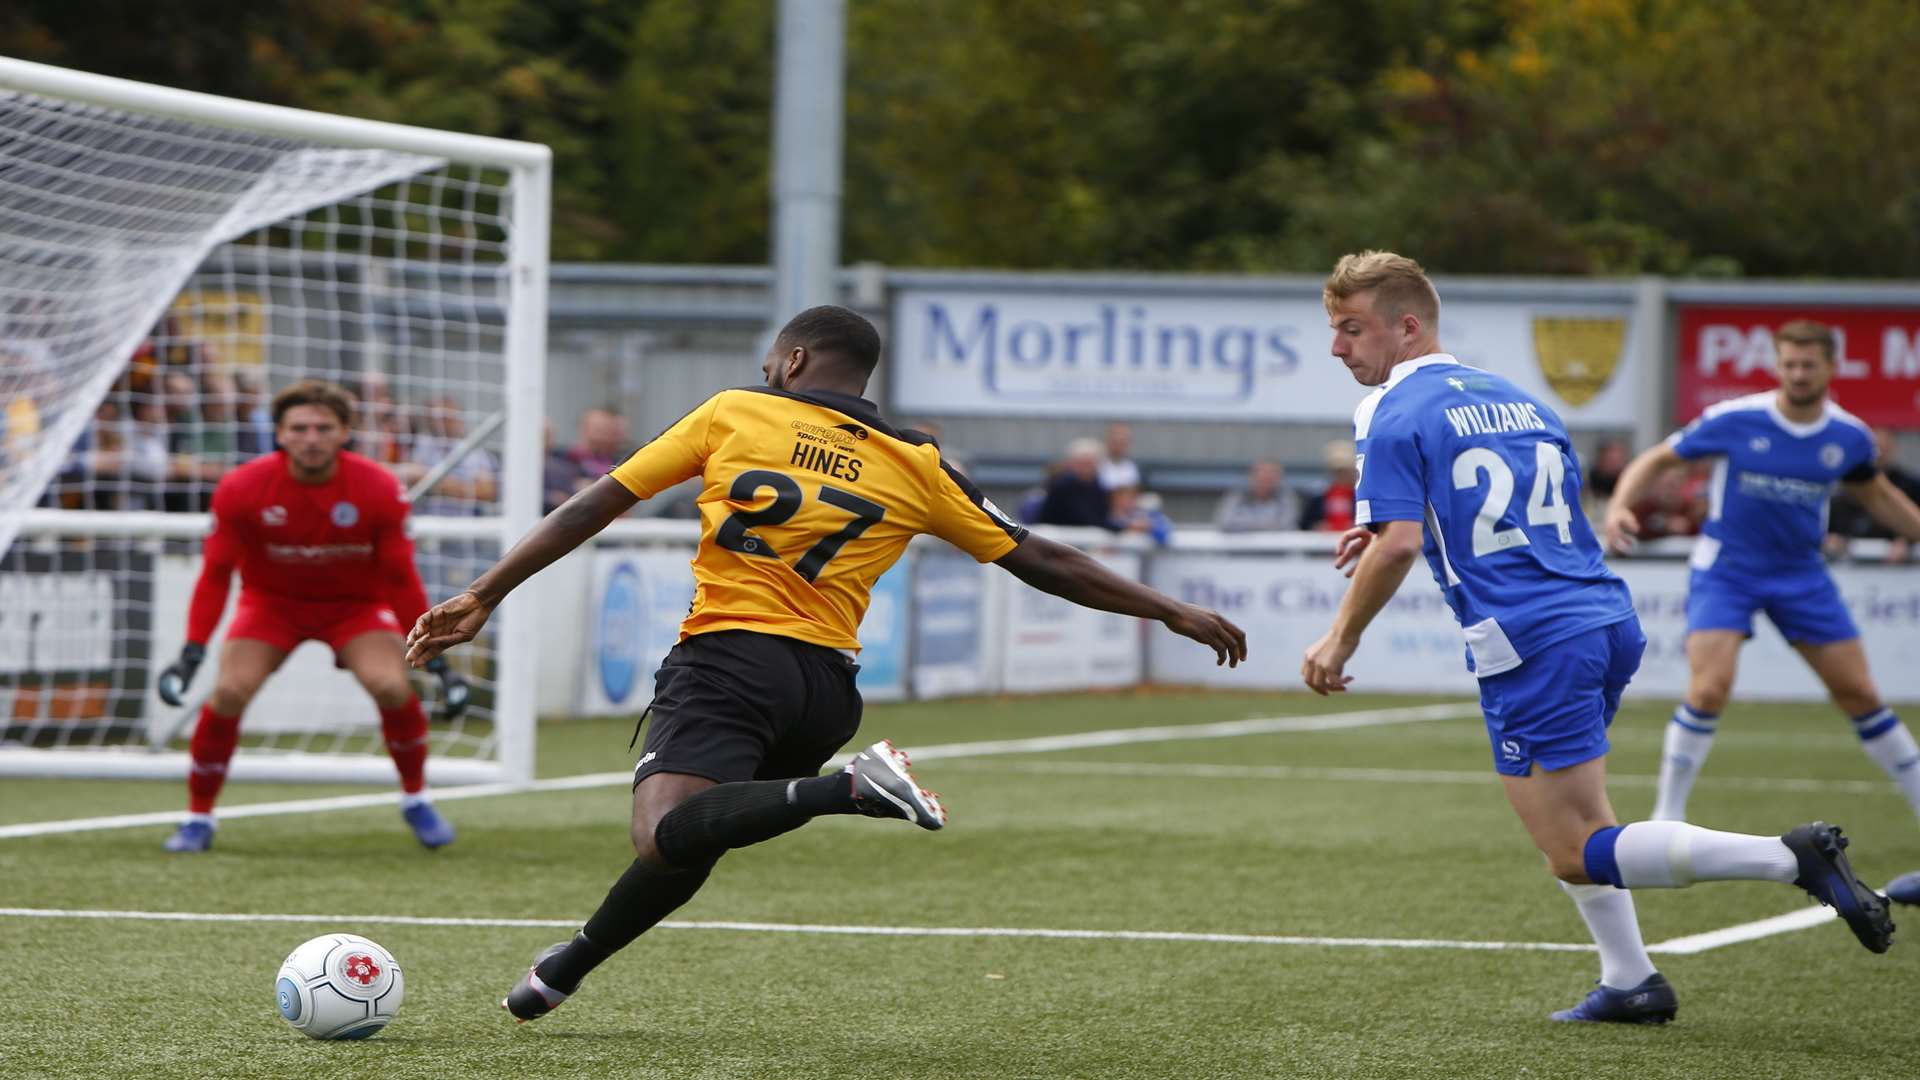 Zavon Hines goes for goal Picture: Andy Jones